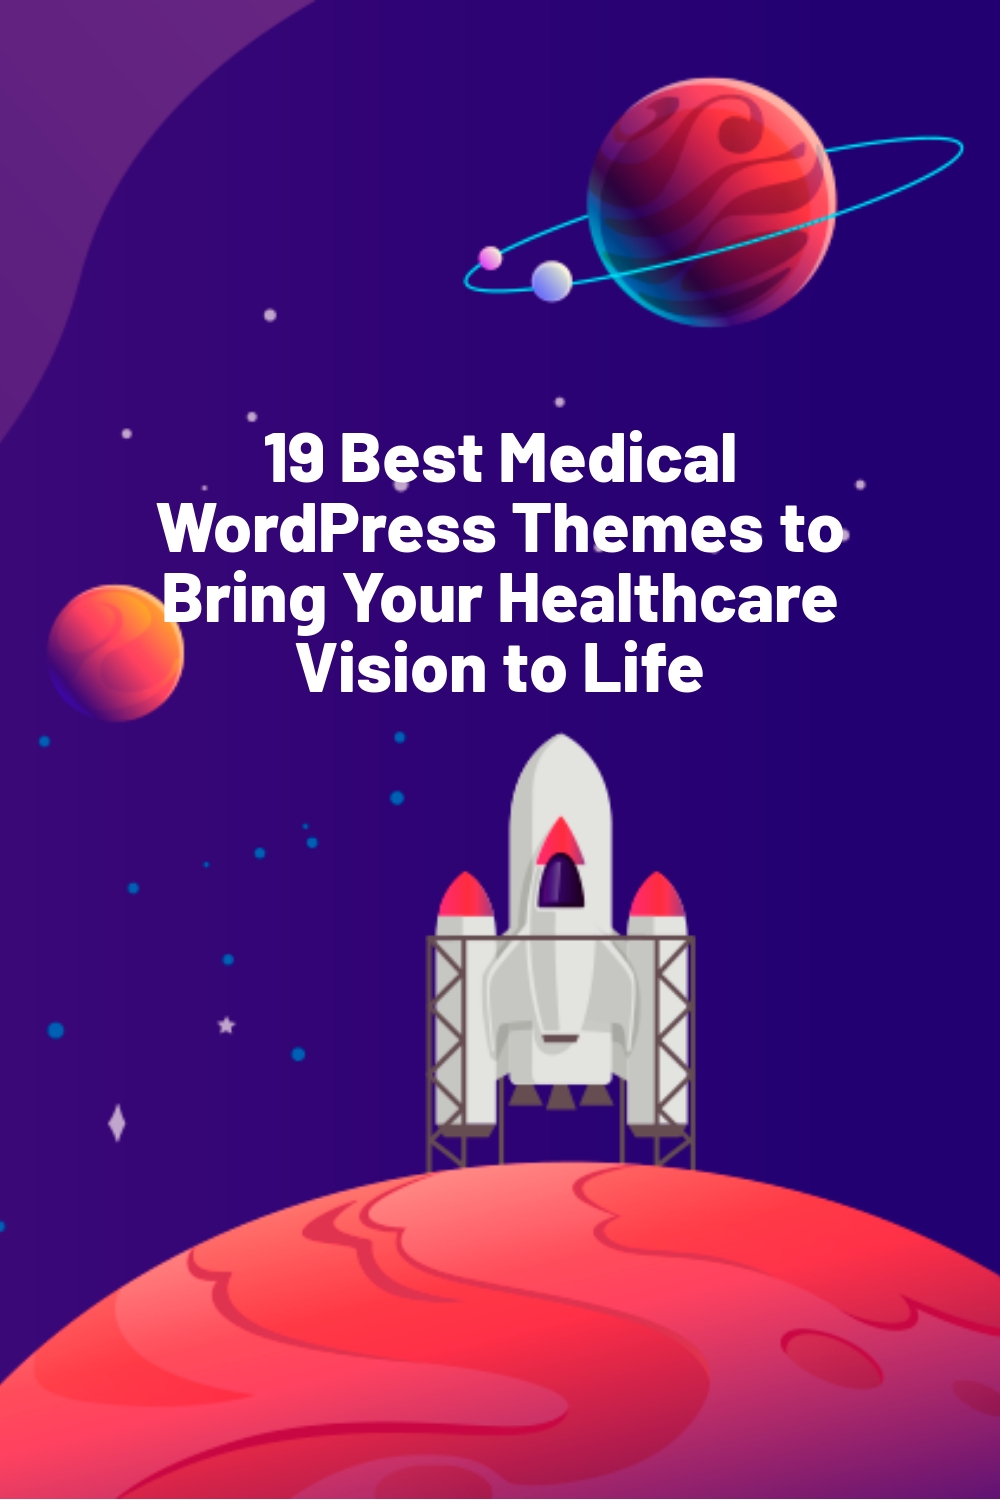 19 Best Medical WordPress Themes to Bring Your Healthcare Vision to Life